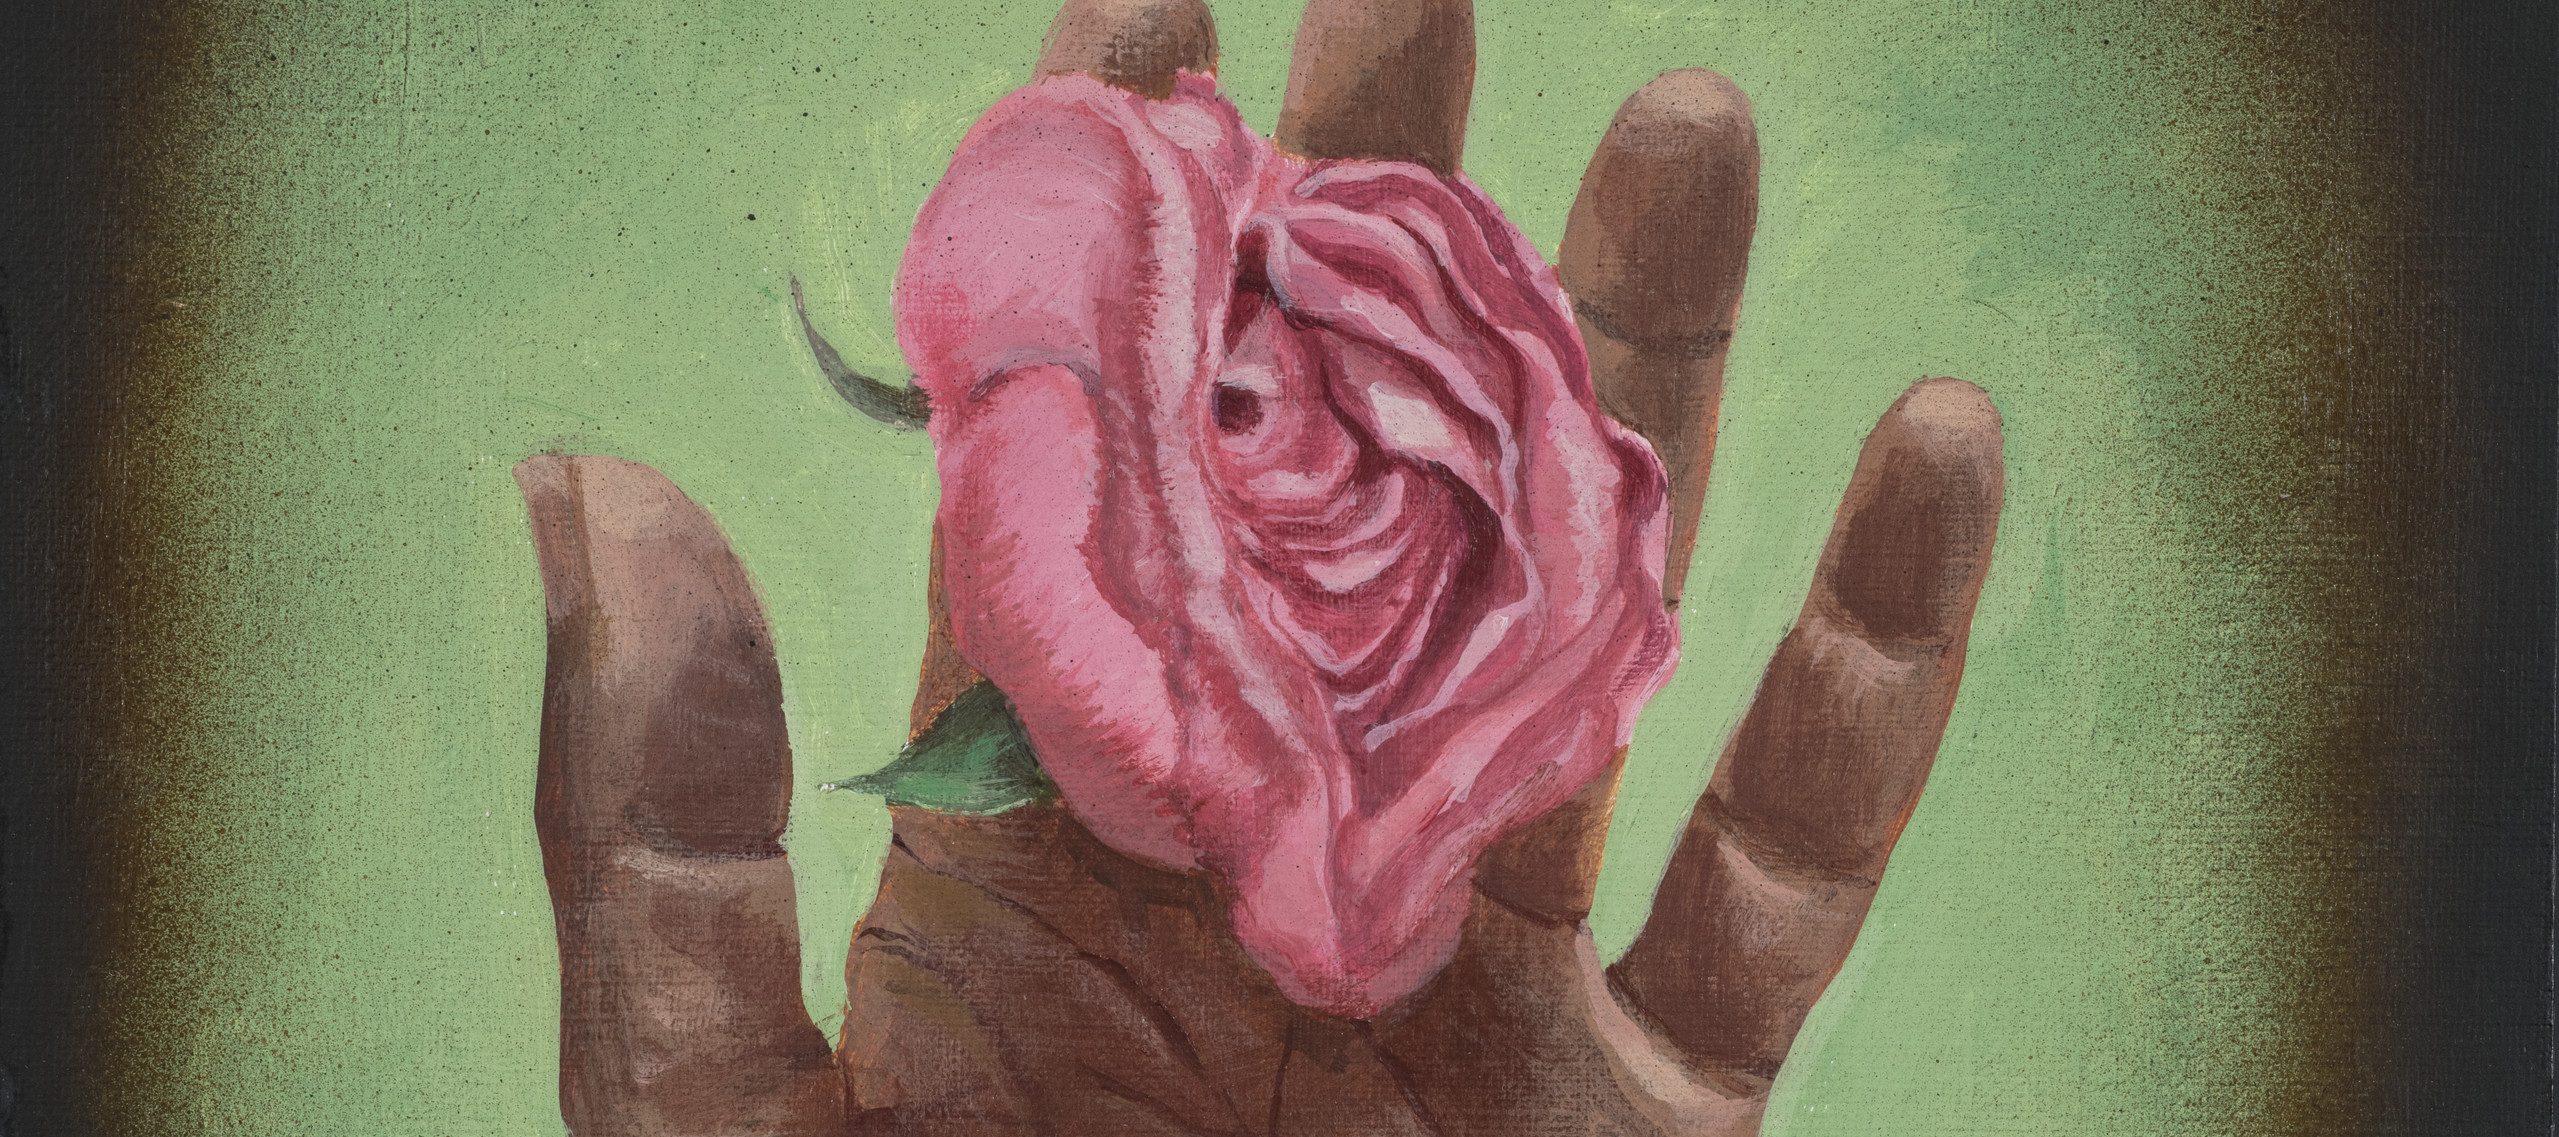 A realistic painting of a medium-dark skinned left hand facing palm-up against a light green background that fades to black. Resting on the hand is a pink rose and two full petals are falling from it.